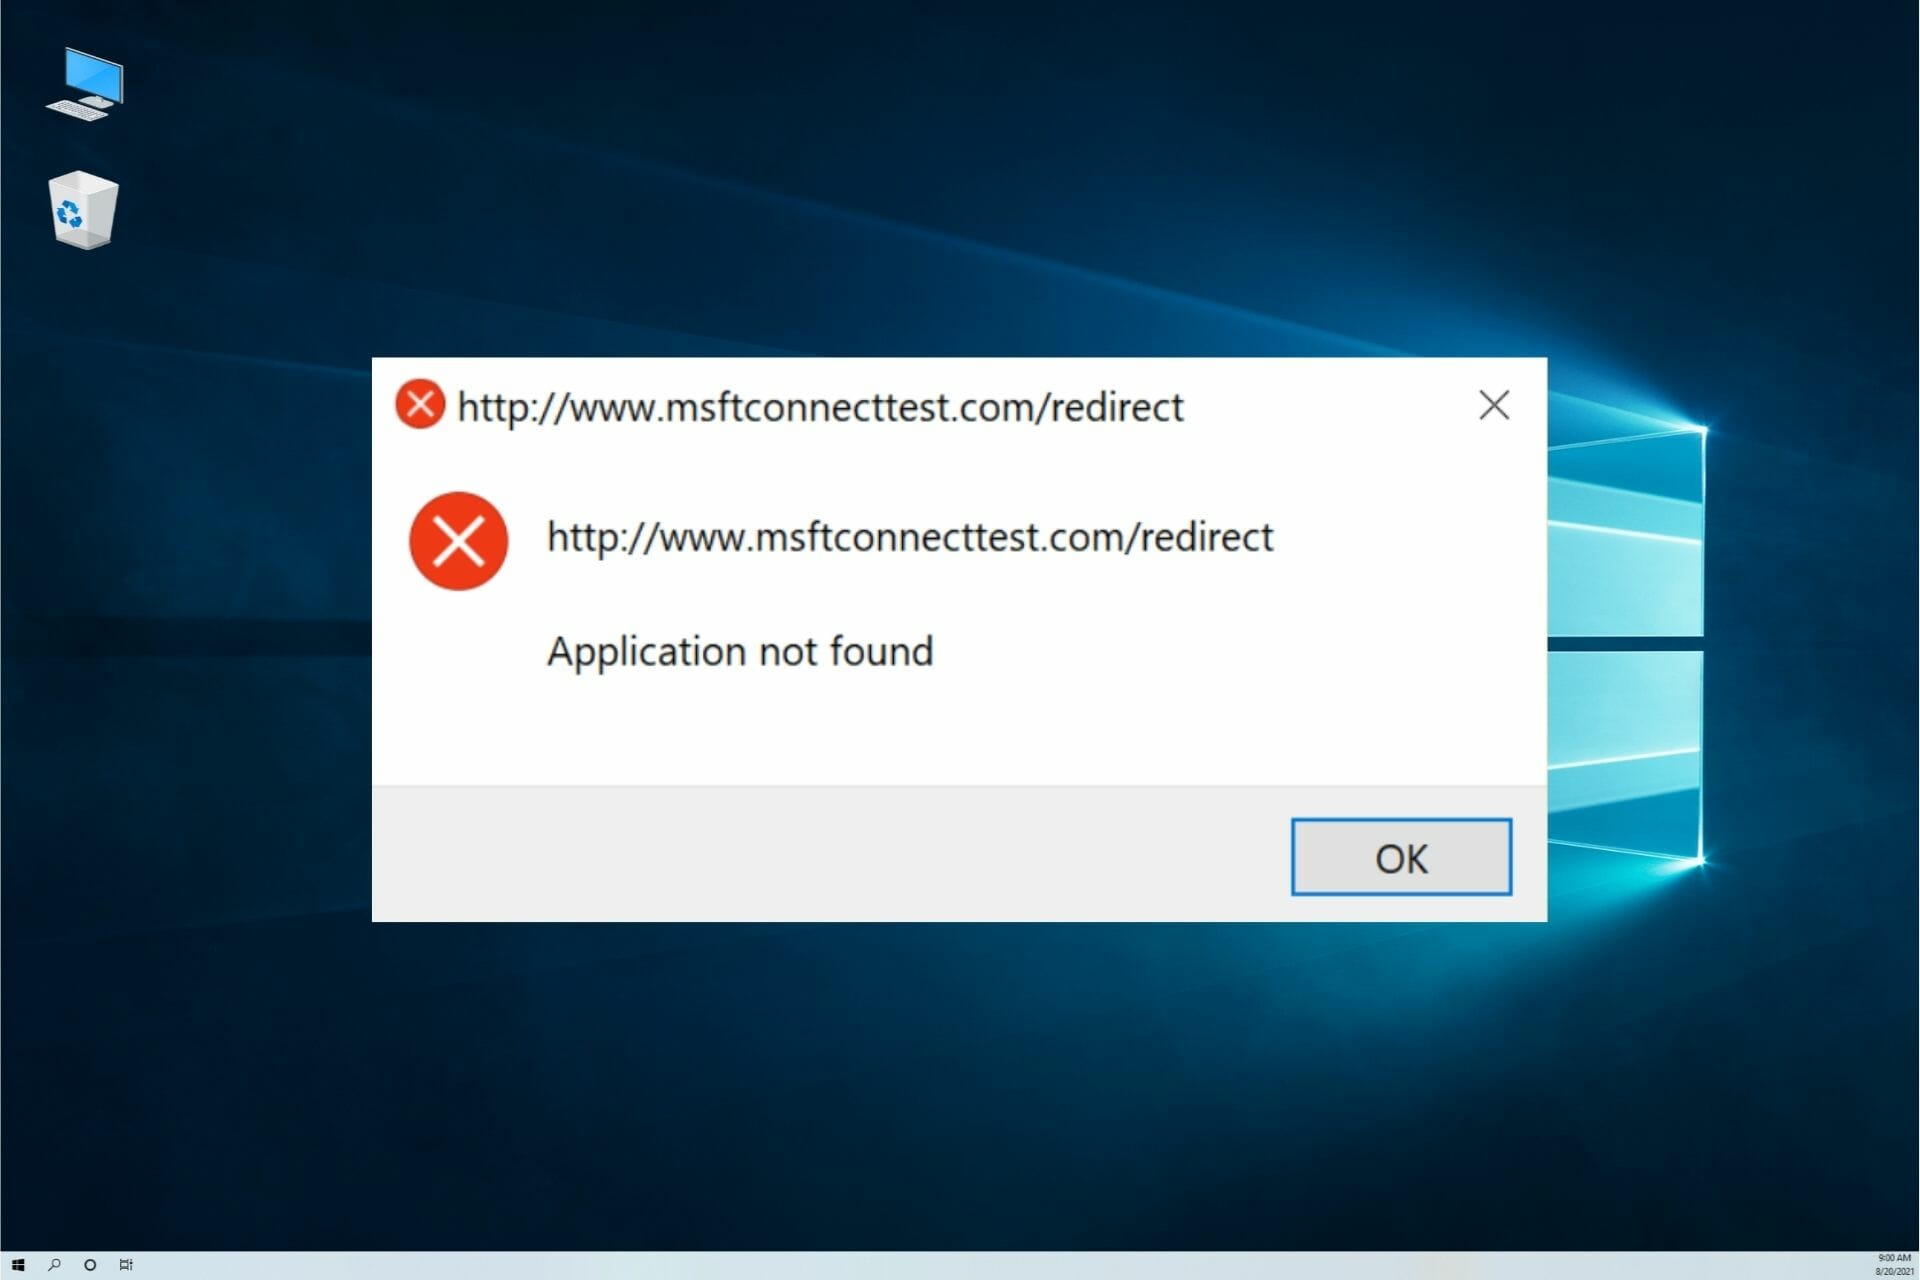 How to fix msftconnecttest redirect error